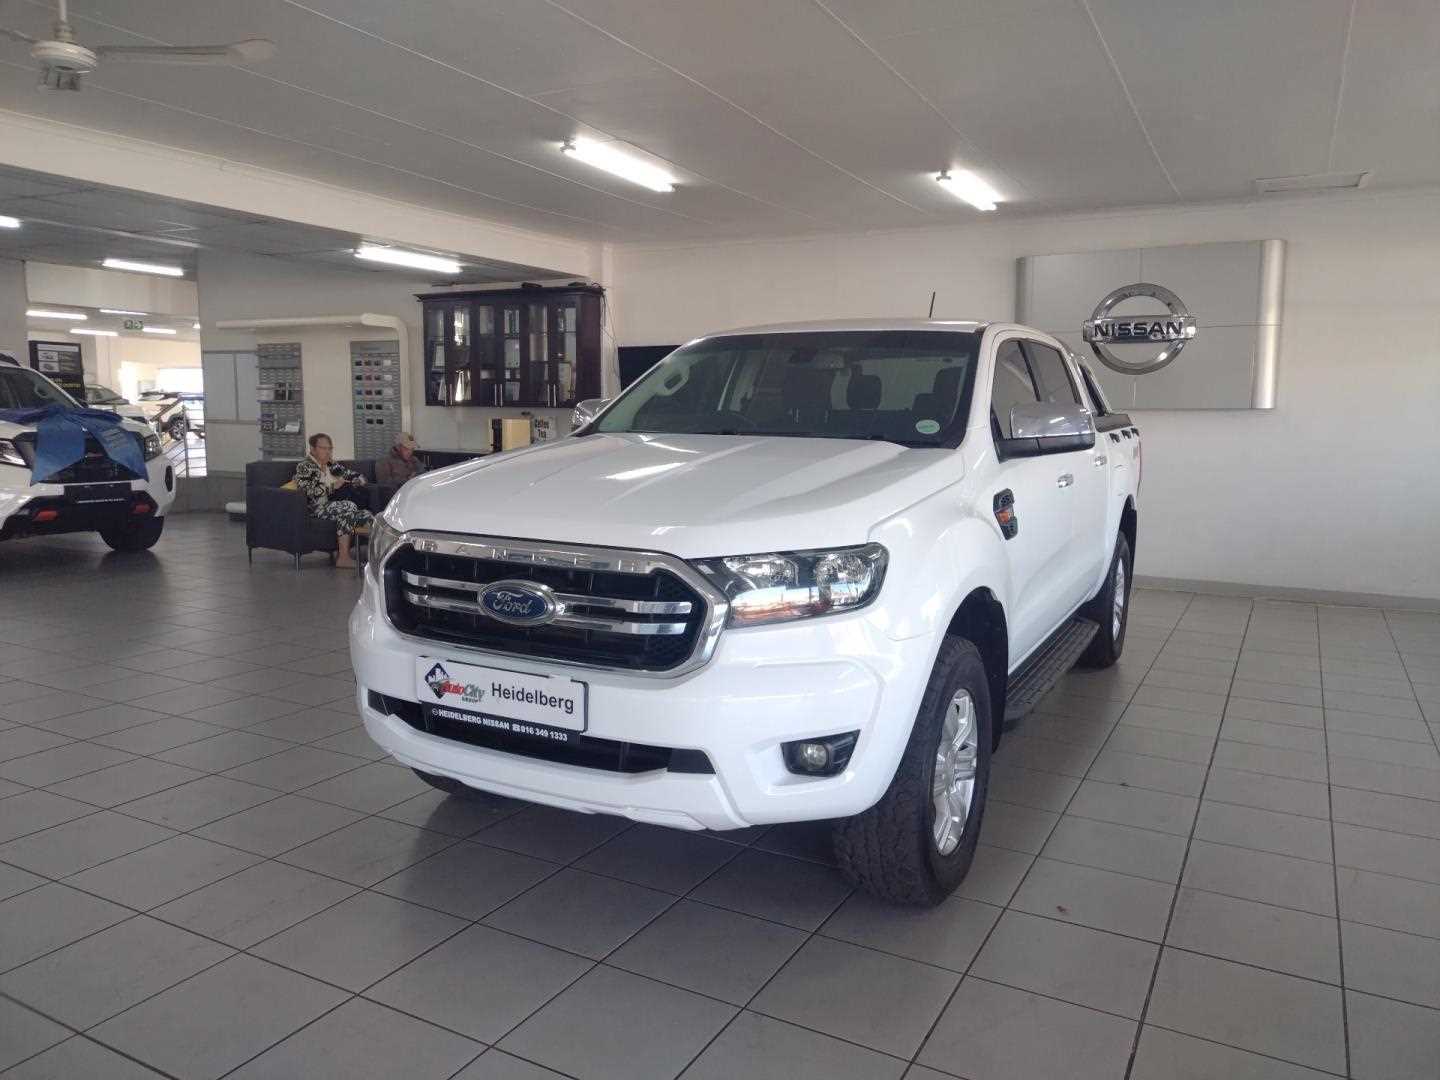 2019 Ford Ranger  2.2 Tdci Xls 4X4 D/cab At for sale - 337681